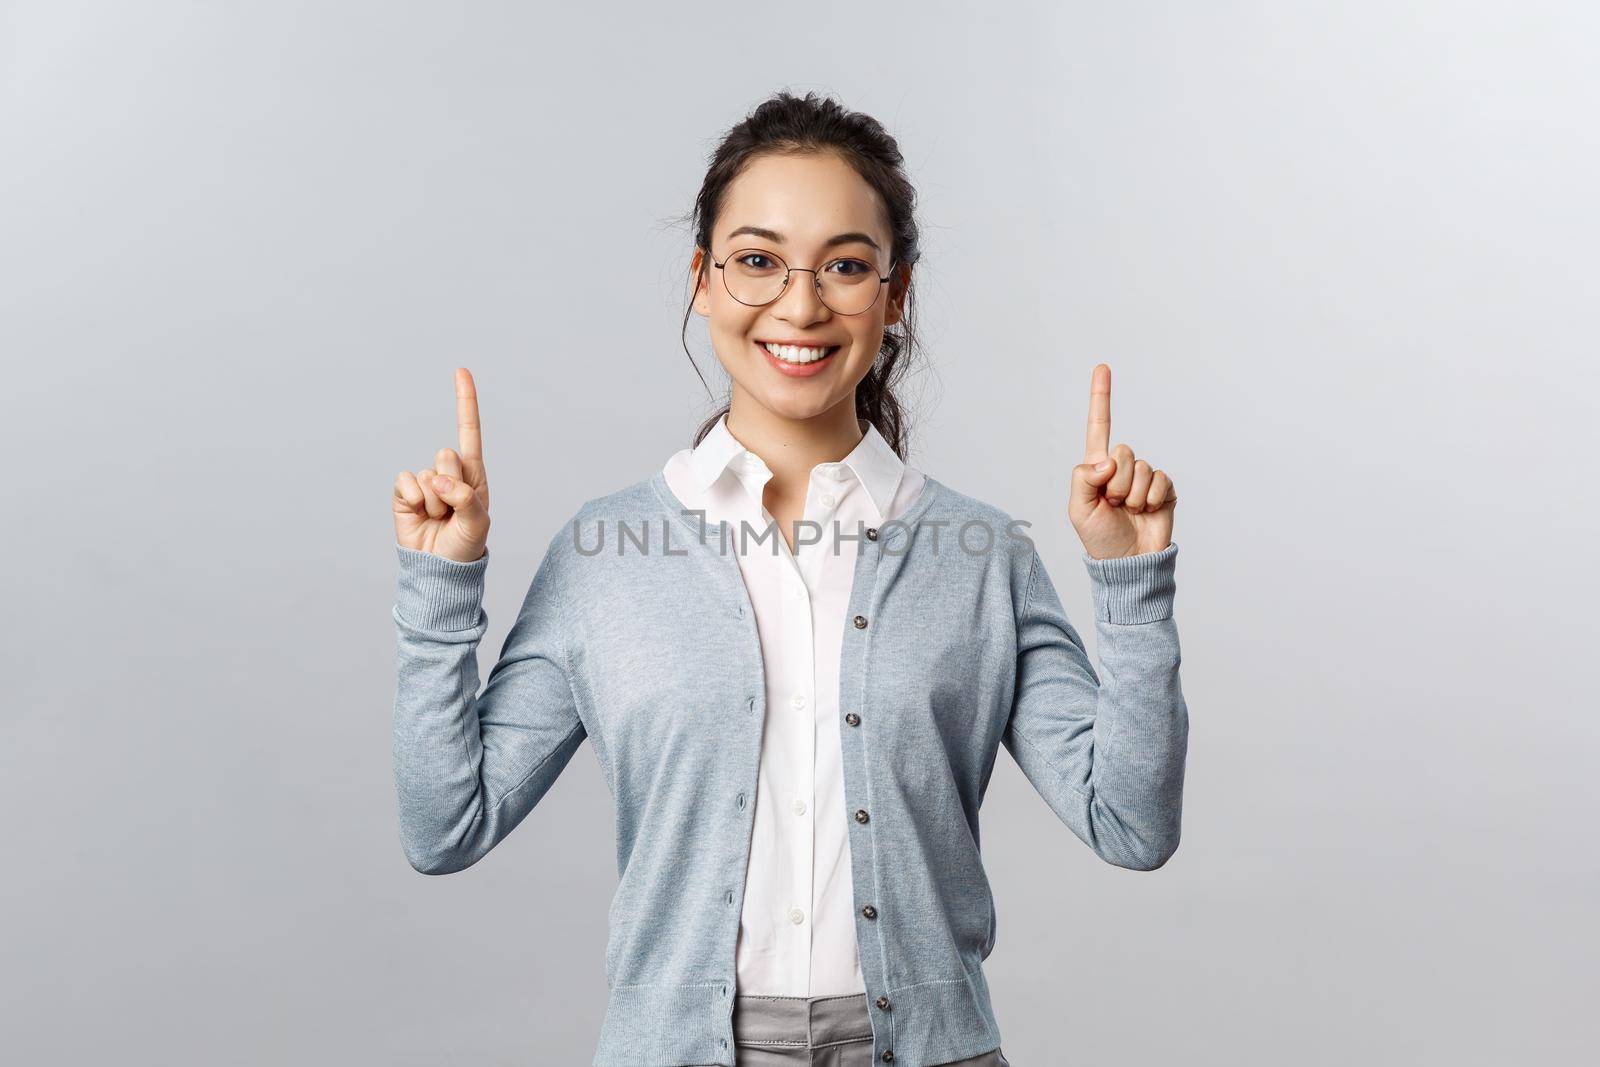 Friendly cheerful asian girl in glasses, showing product or company banner, pointing fingers up inviting check-up event news, info about advertisement, smiling adorable at camera, grey background.